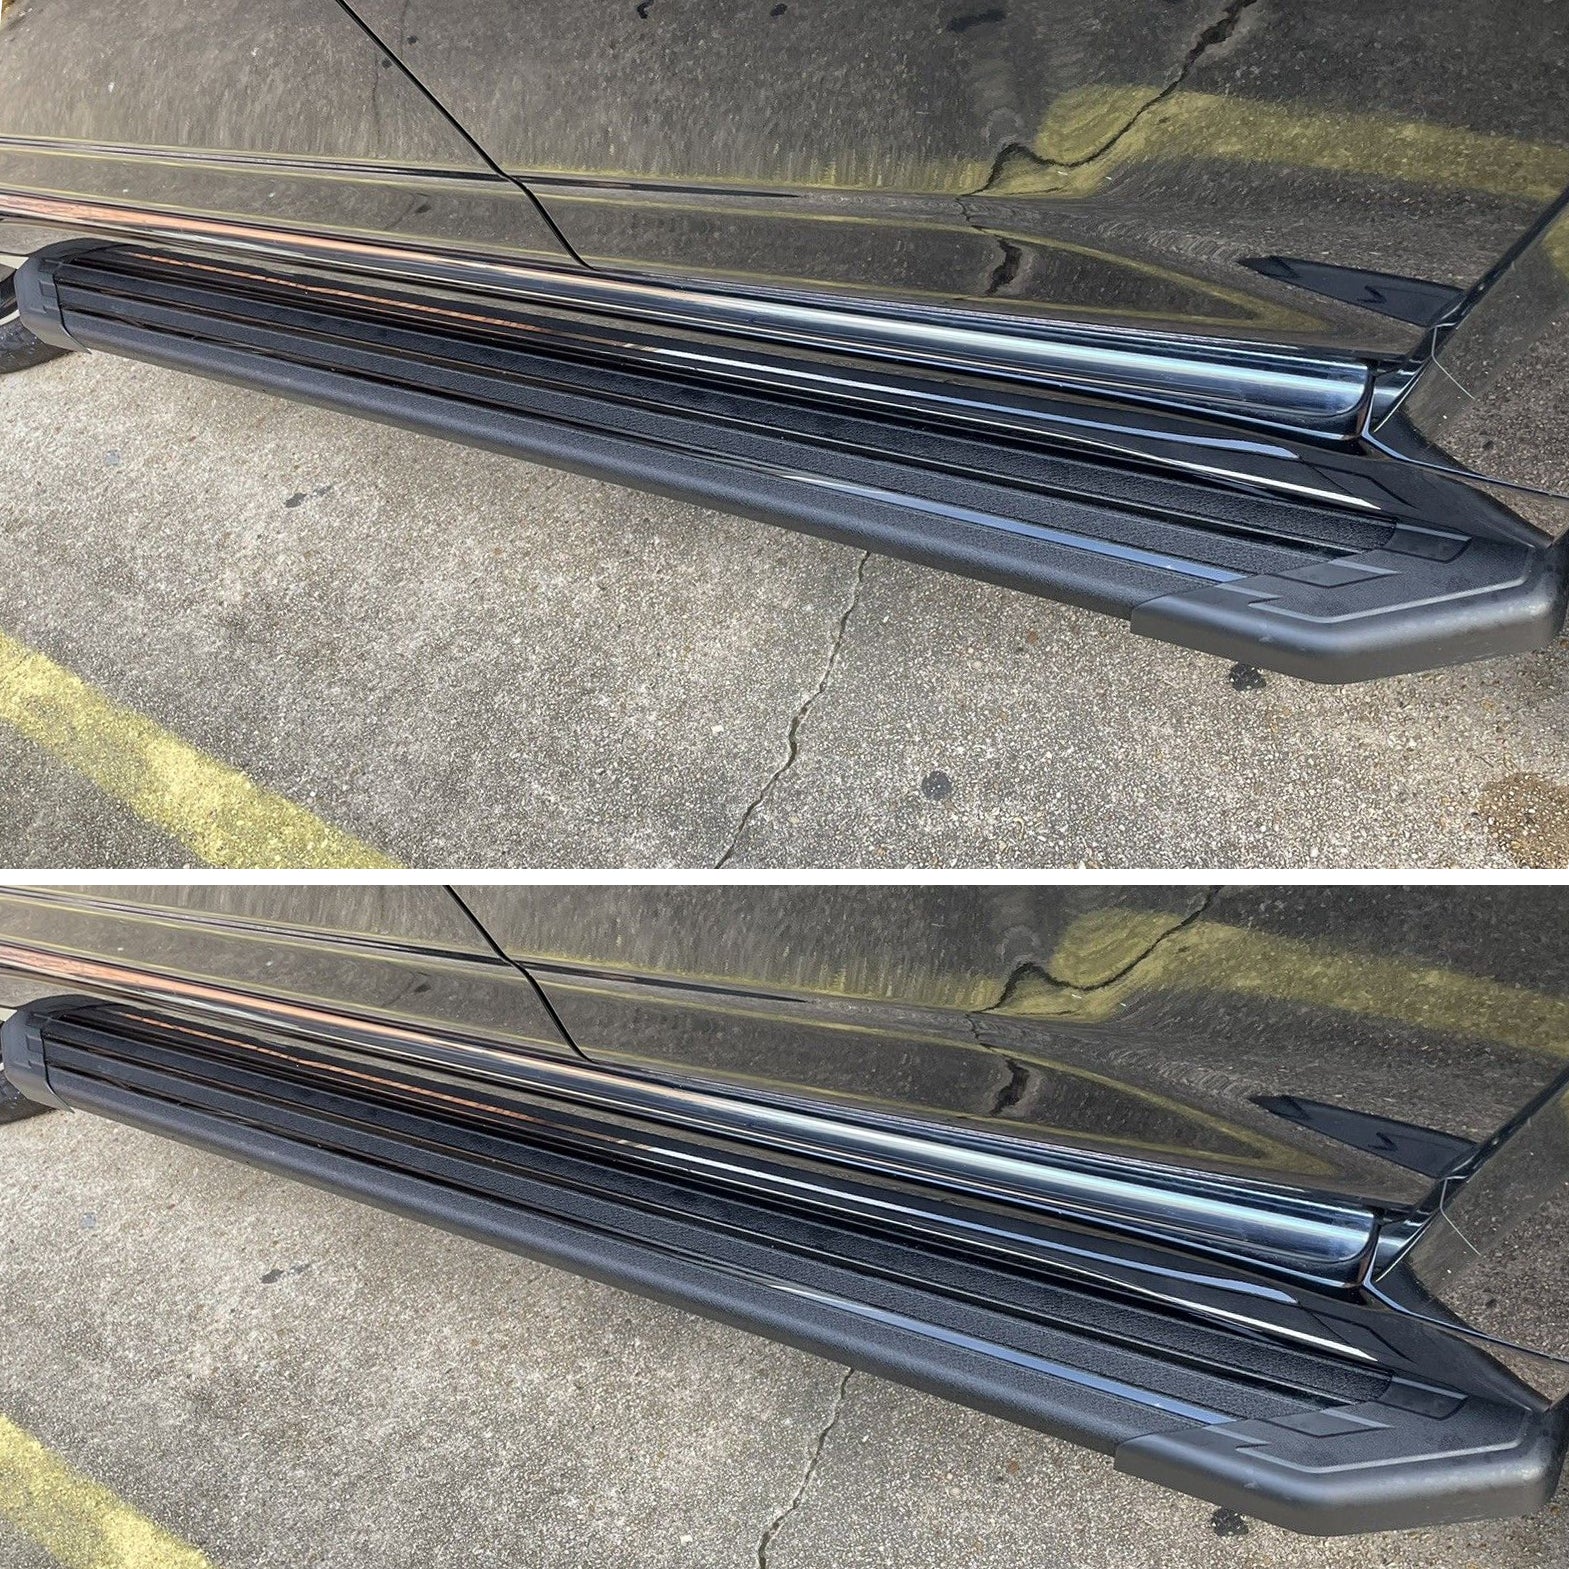 5.5Inch Aluminum Running Boards Compatible with 2011-2021 Jeep Grand Cherokee. C73 Style. - COMNOVA AUTOPART